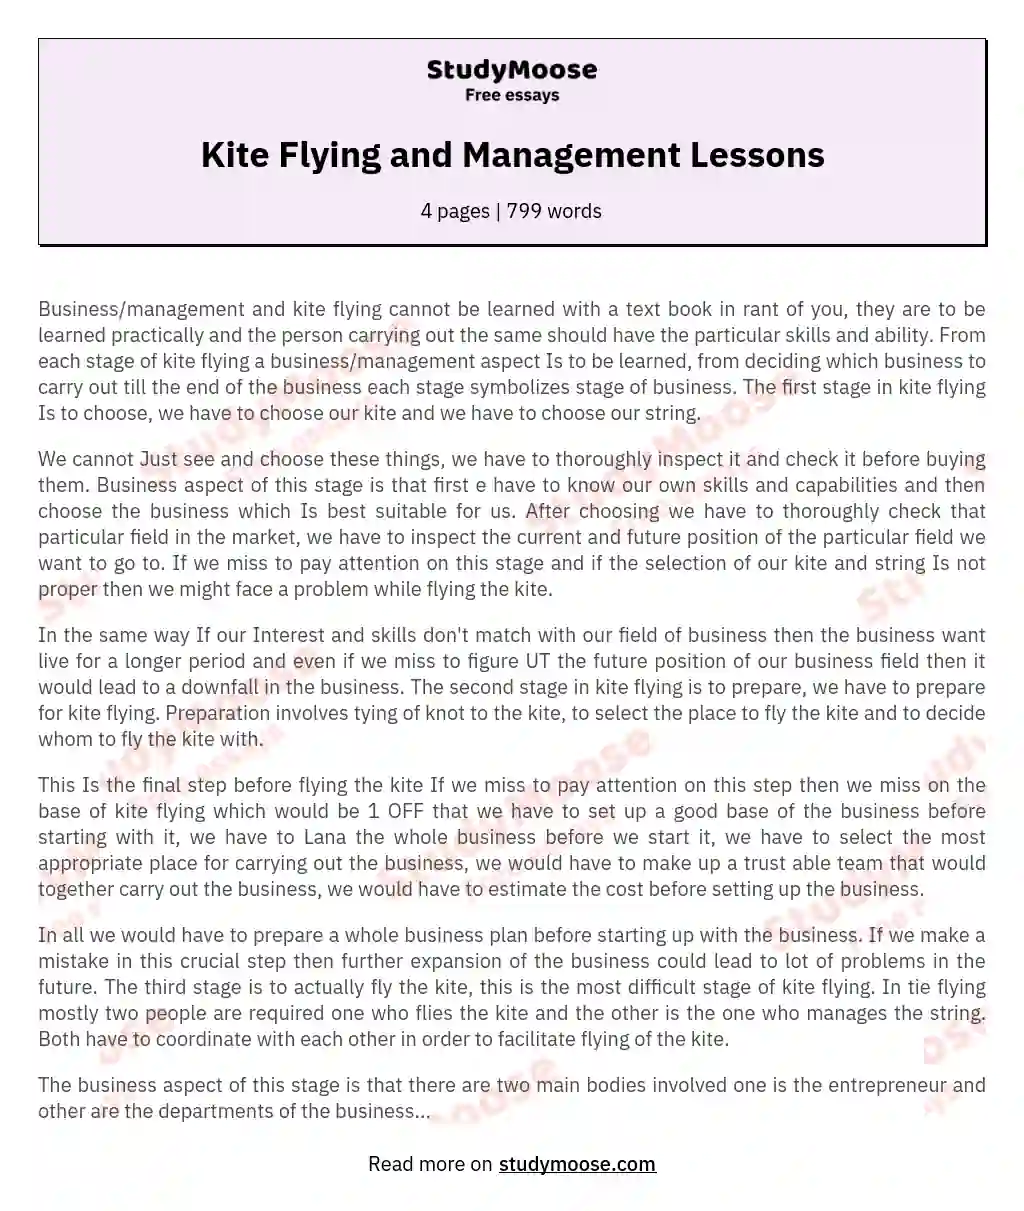 Kite Flying and Management Lessons essay